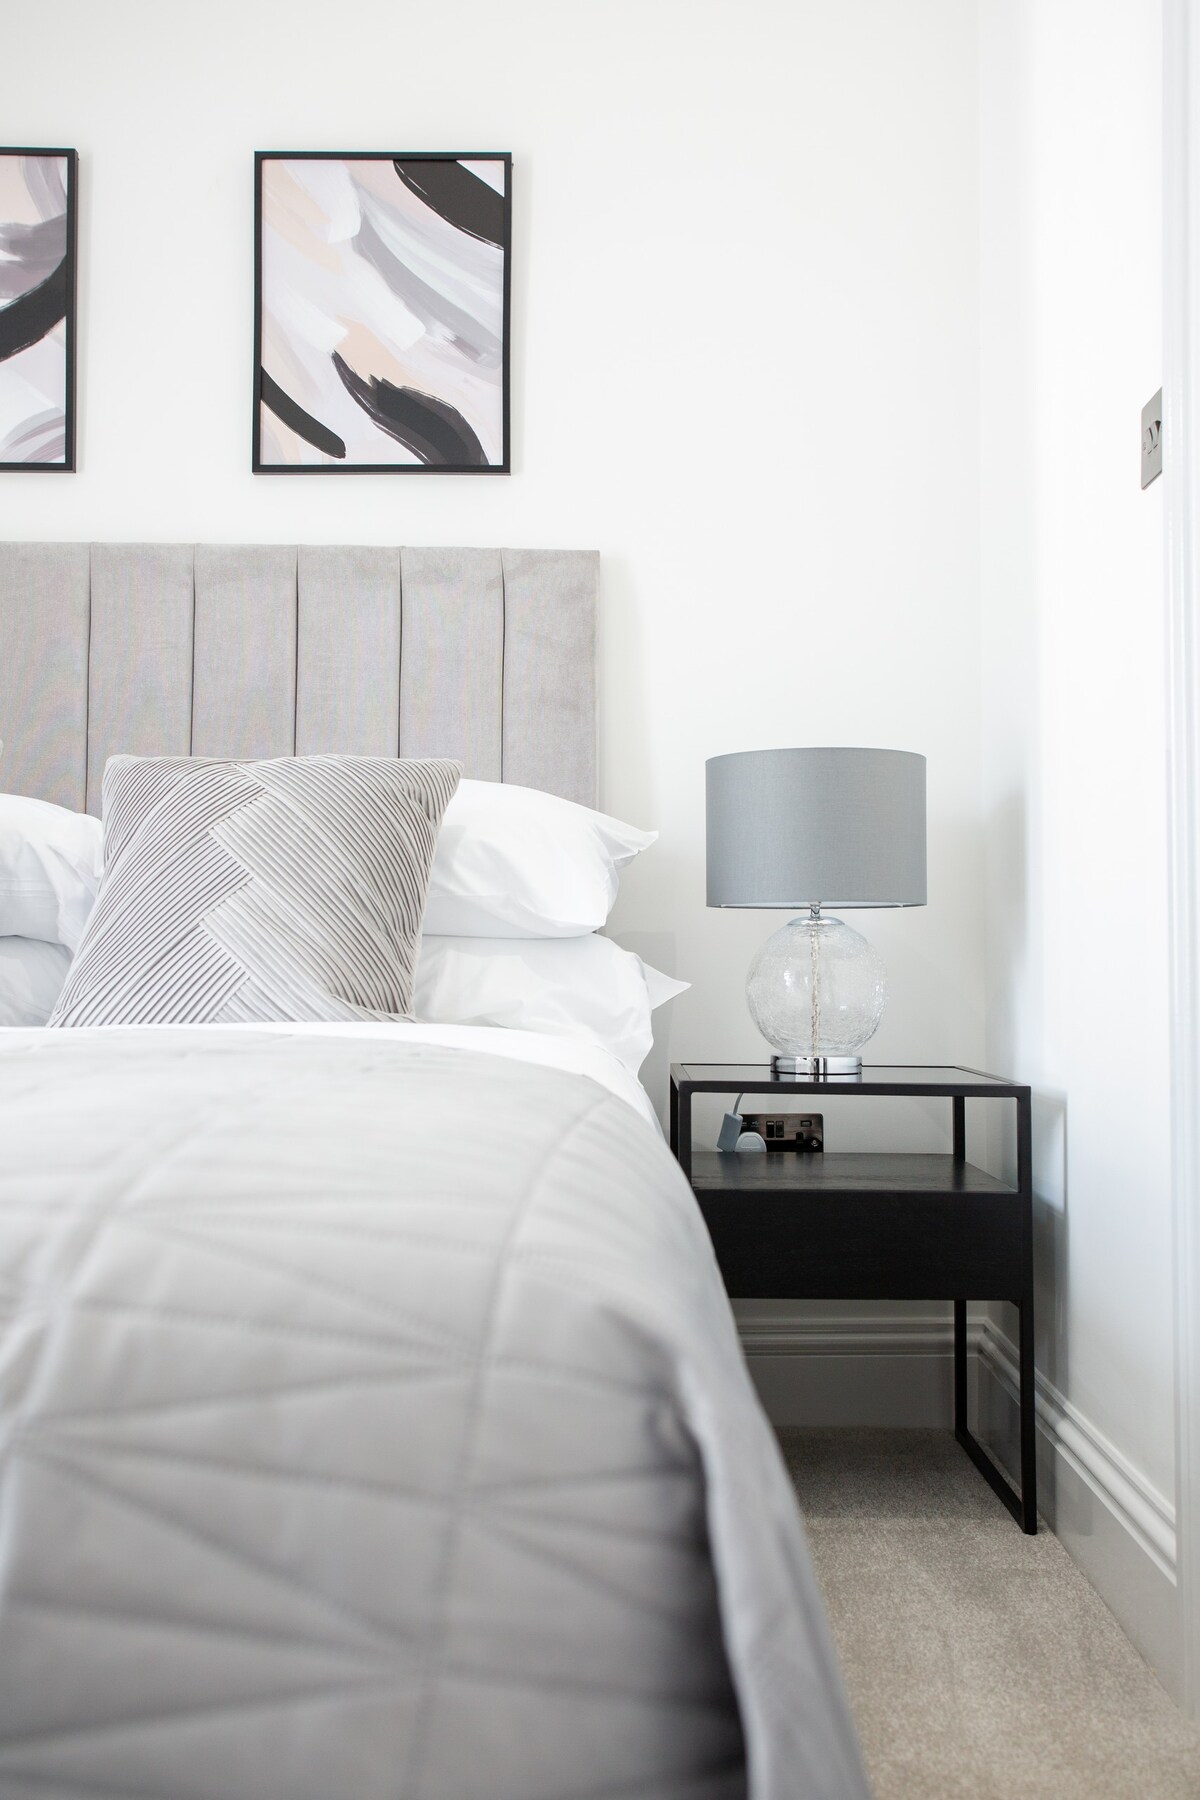 Designer Cardiff Apartments with Free Parking